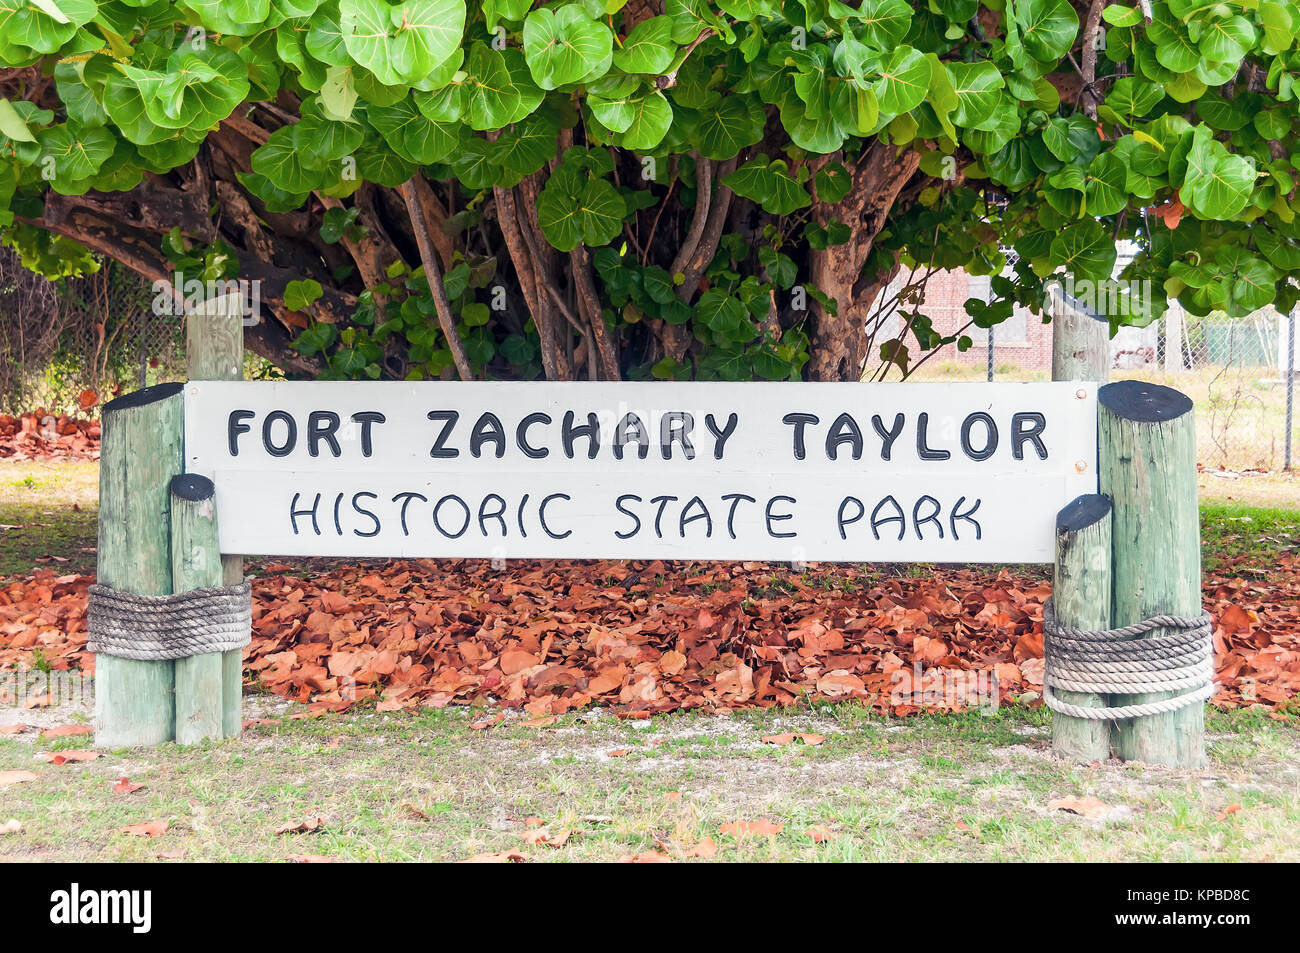 Fort Zachary Taylor Historic State Park sign benath seagrape tree, Key West, Florida Stock Photo